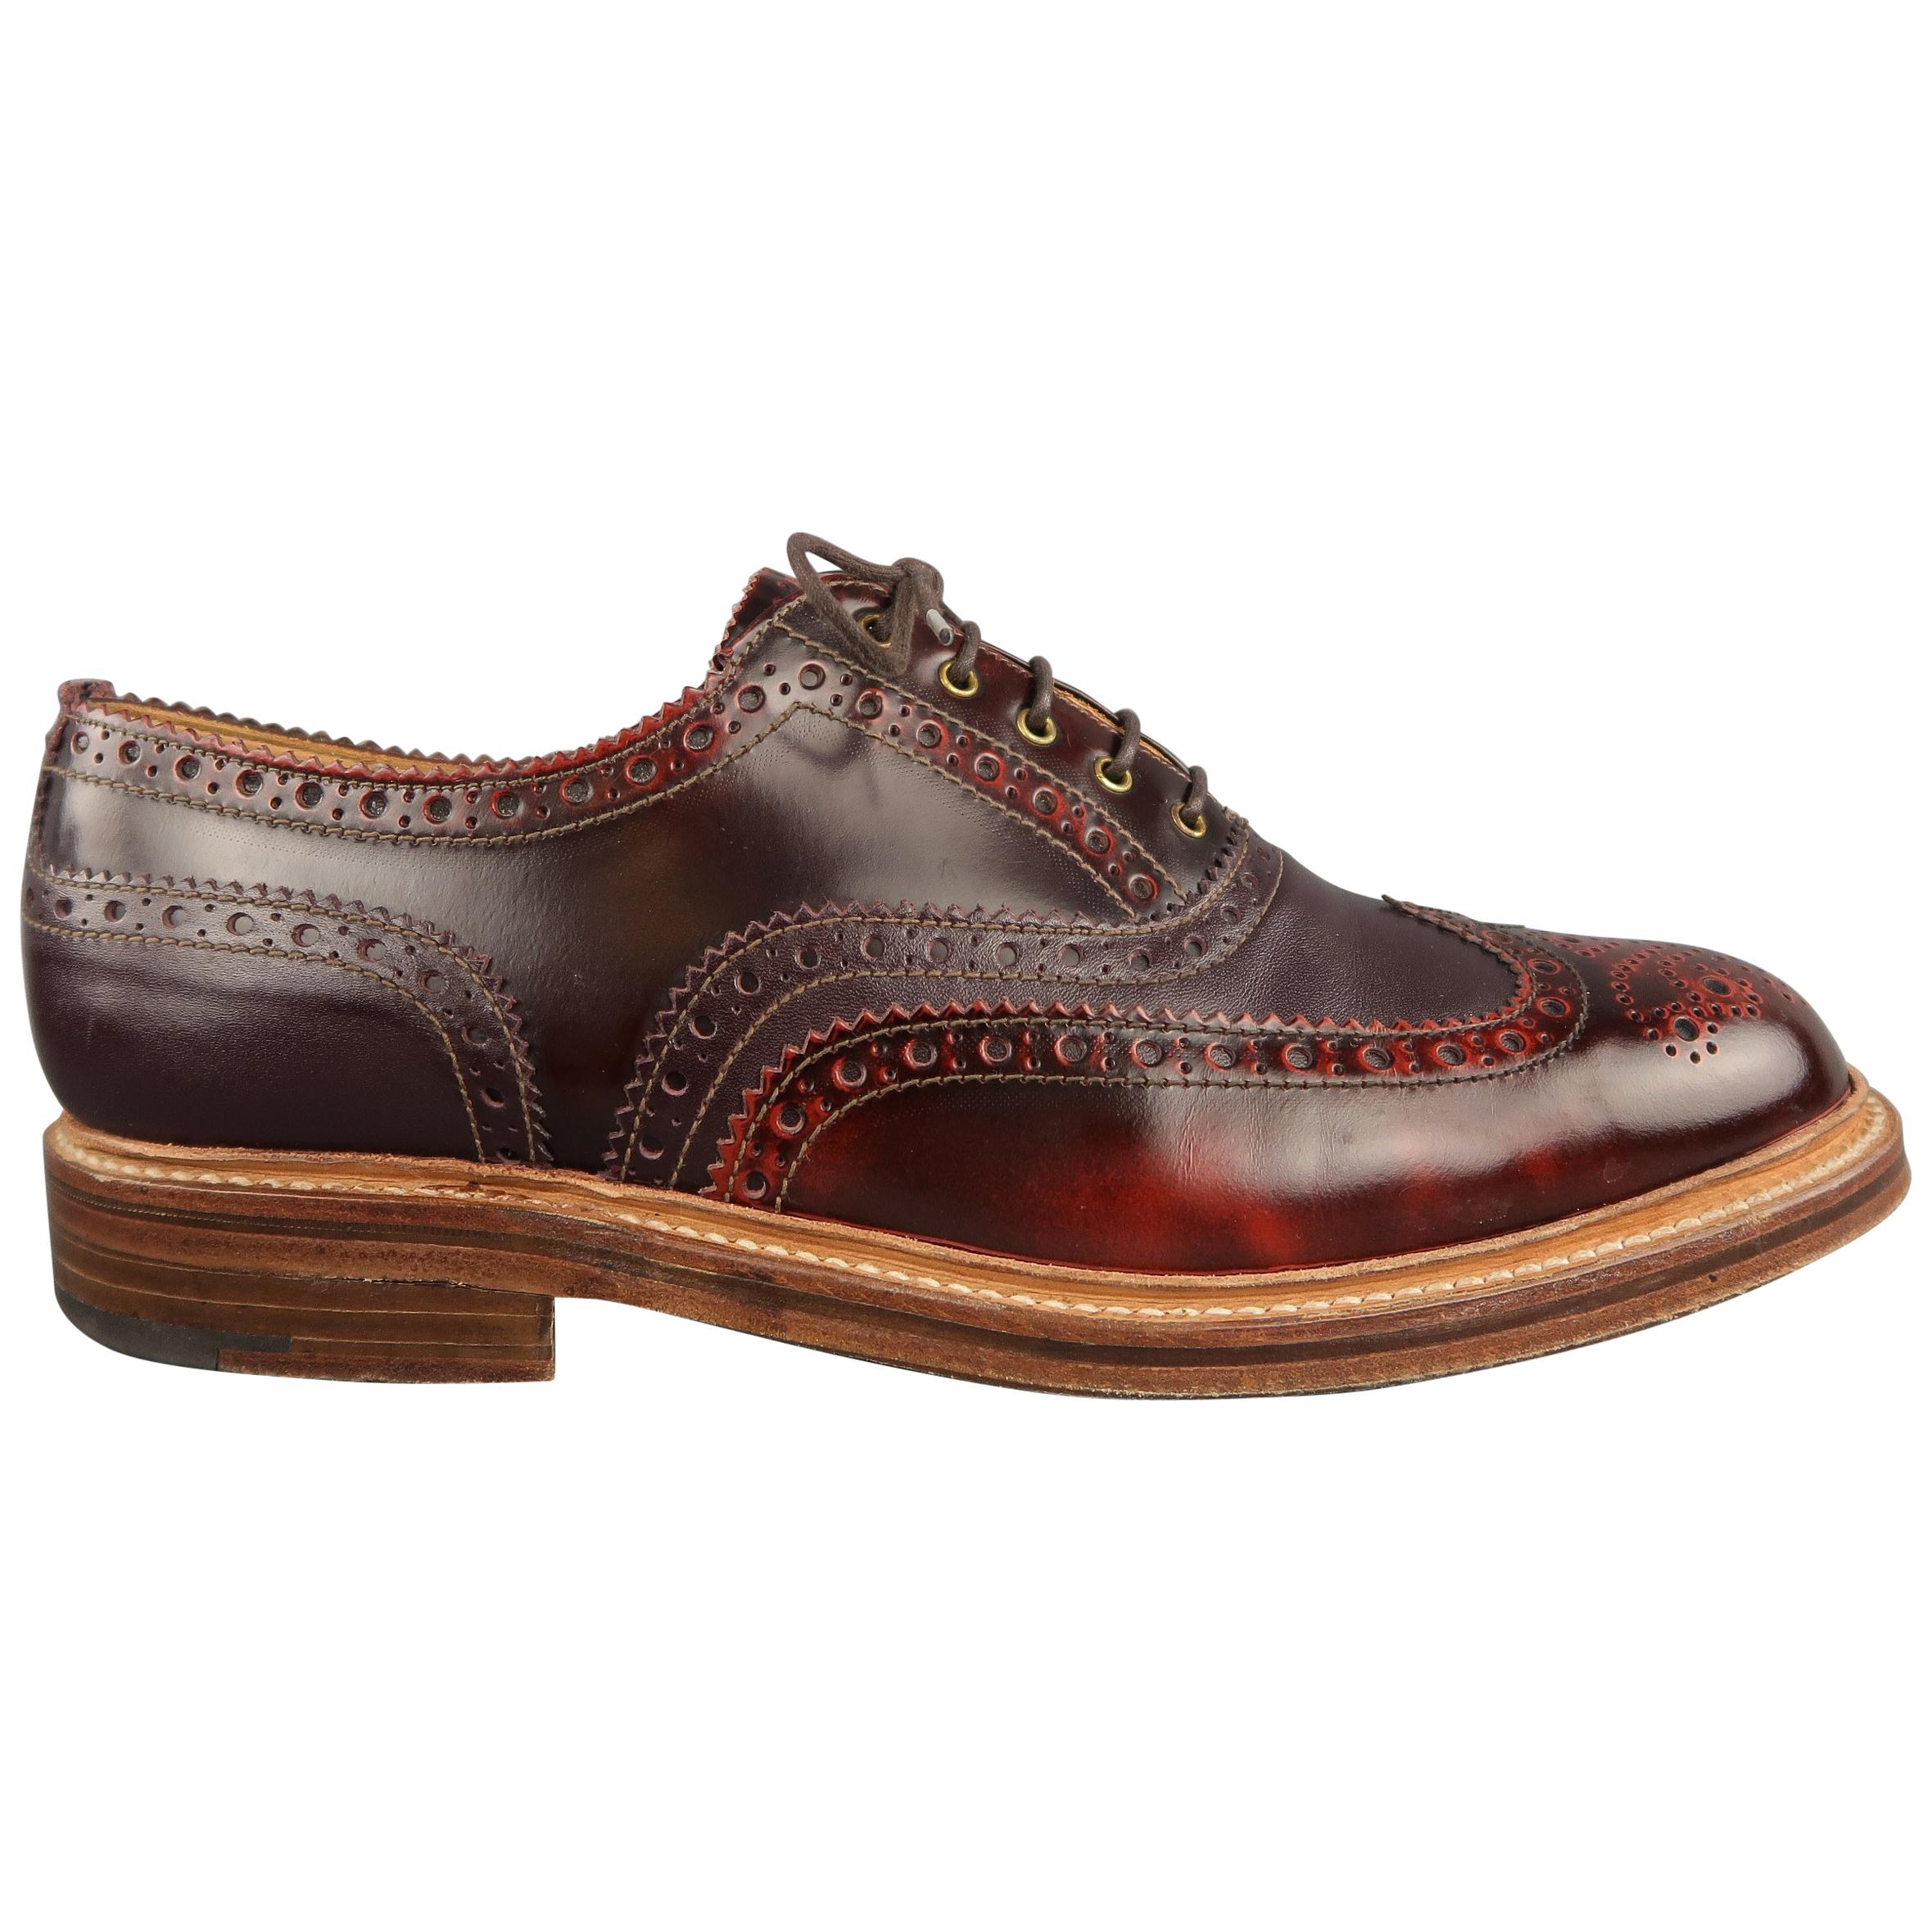 GRENSON Size 12 Burgundy Perforated Leather Lace Up Brogue